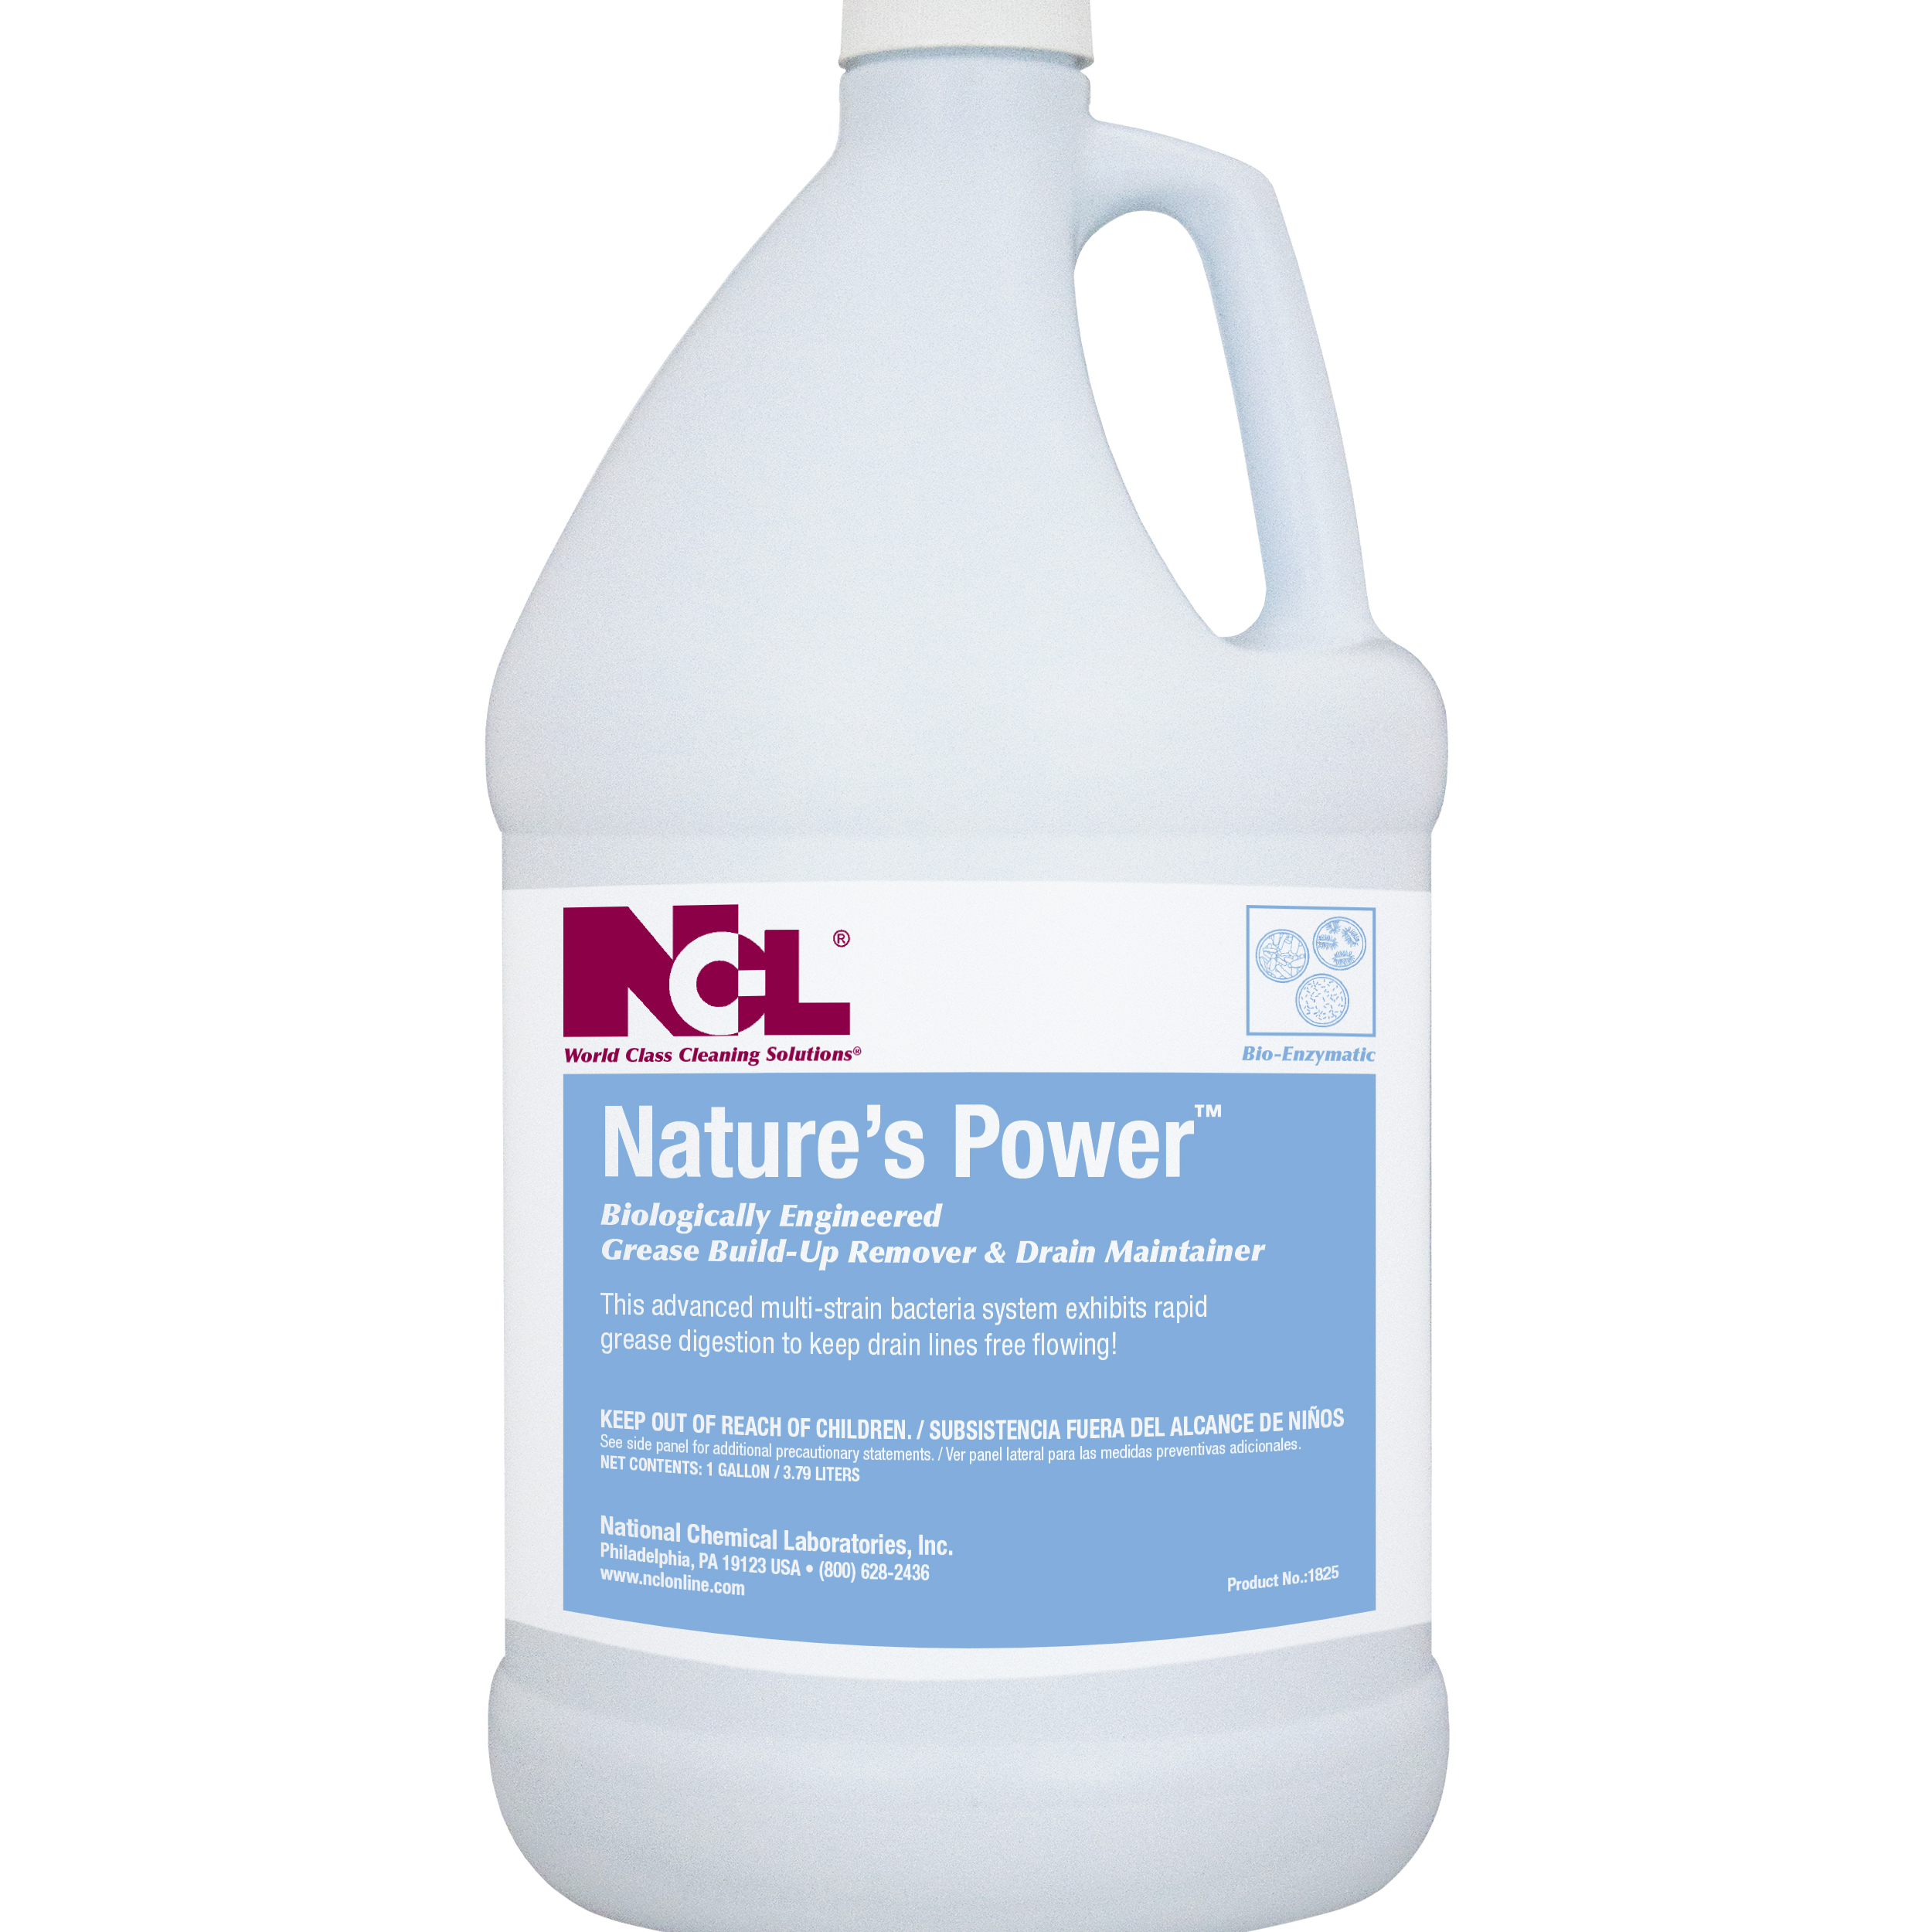  NATURE'S POWER Grease Build-Up Remover & Drain Maintainer 4/1 Gal. Case (NCL1825-29) 